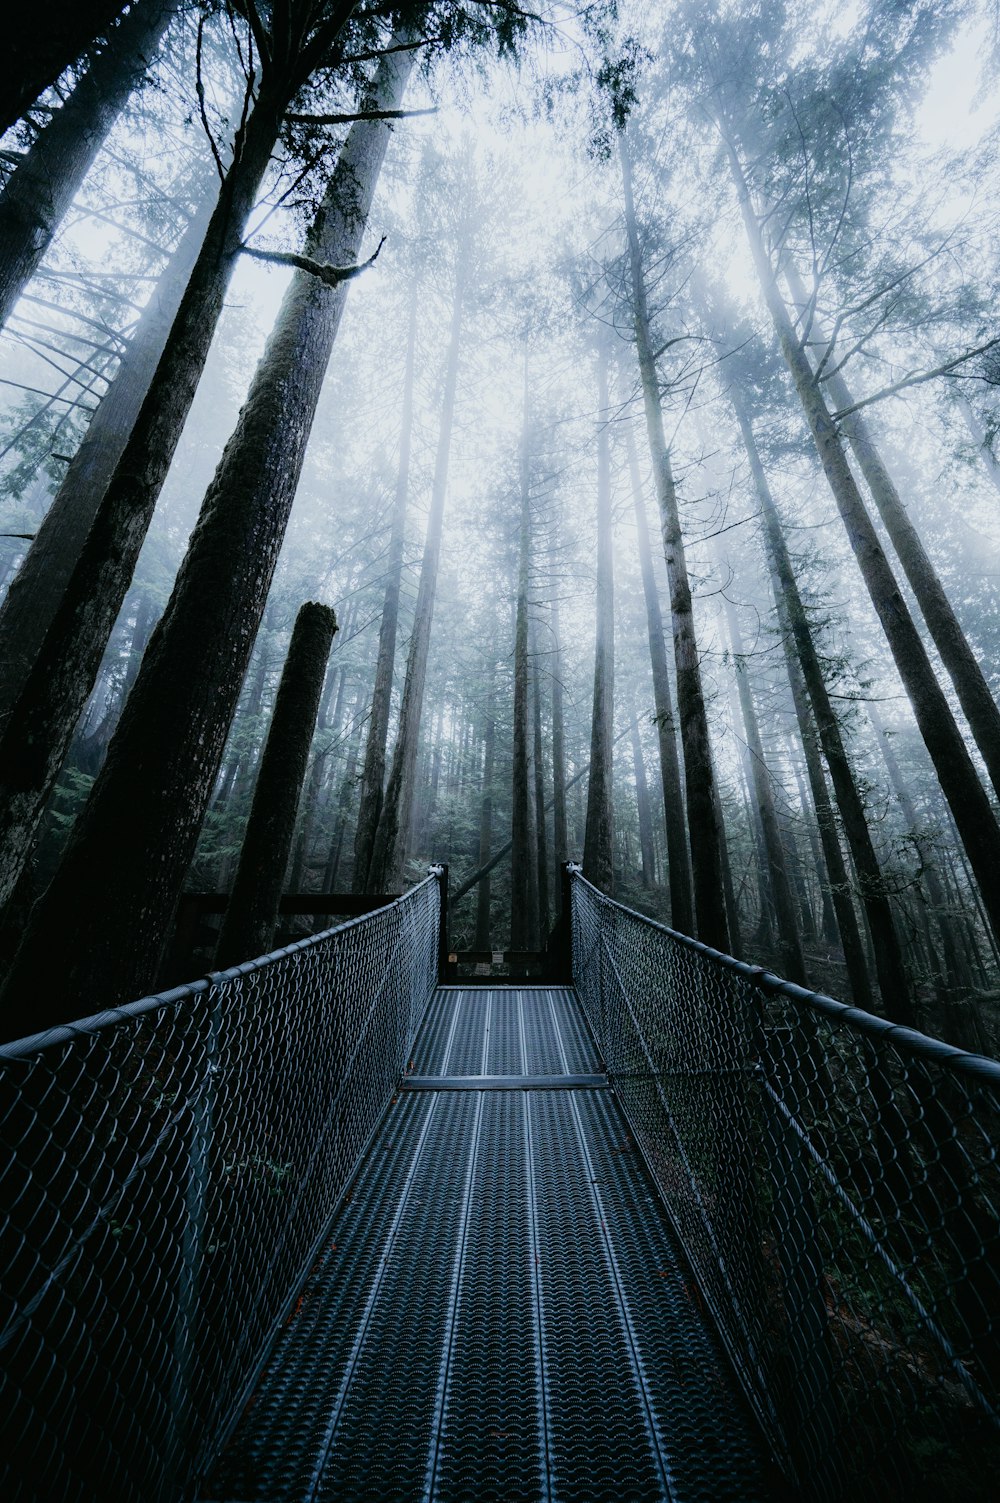 a bridge in the middle of a forest with tall trees